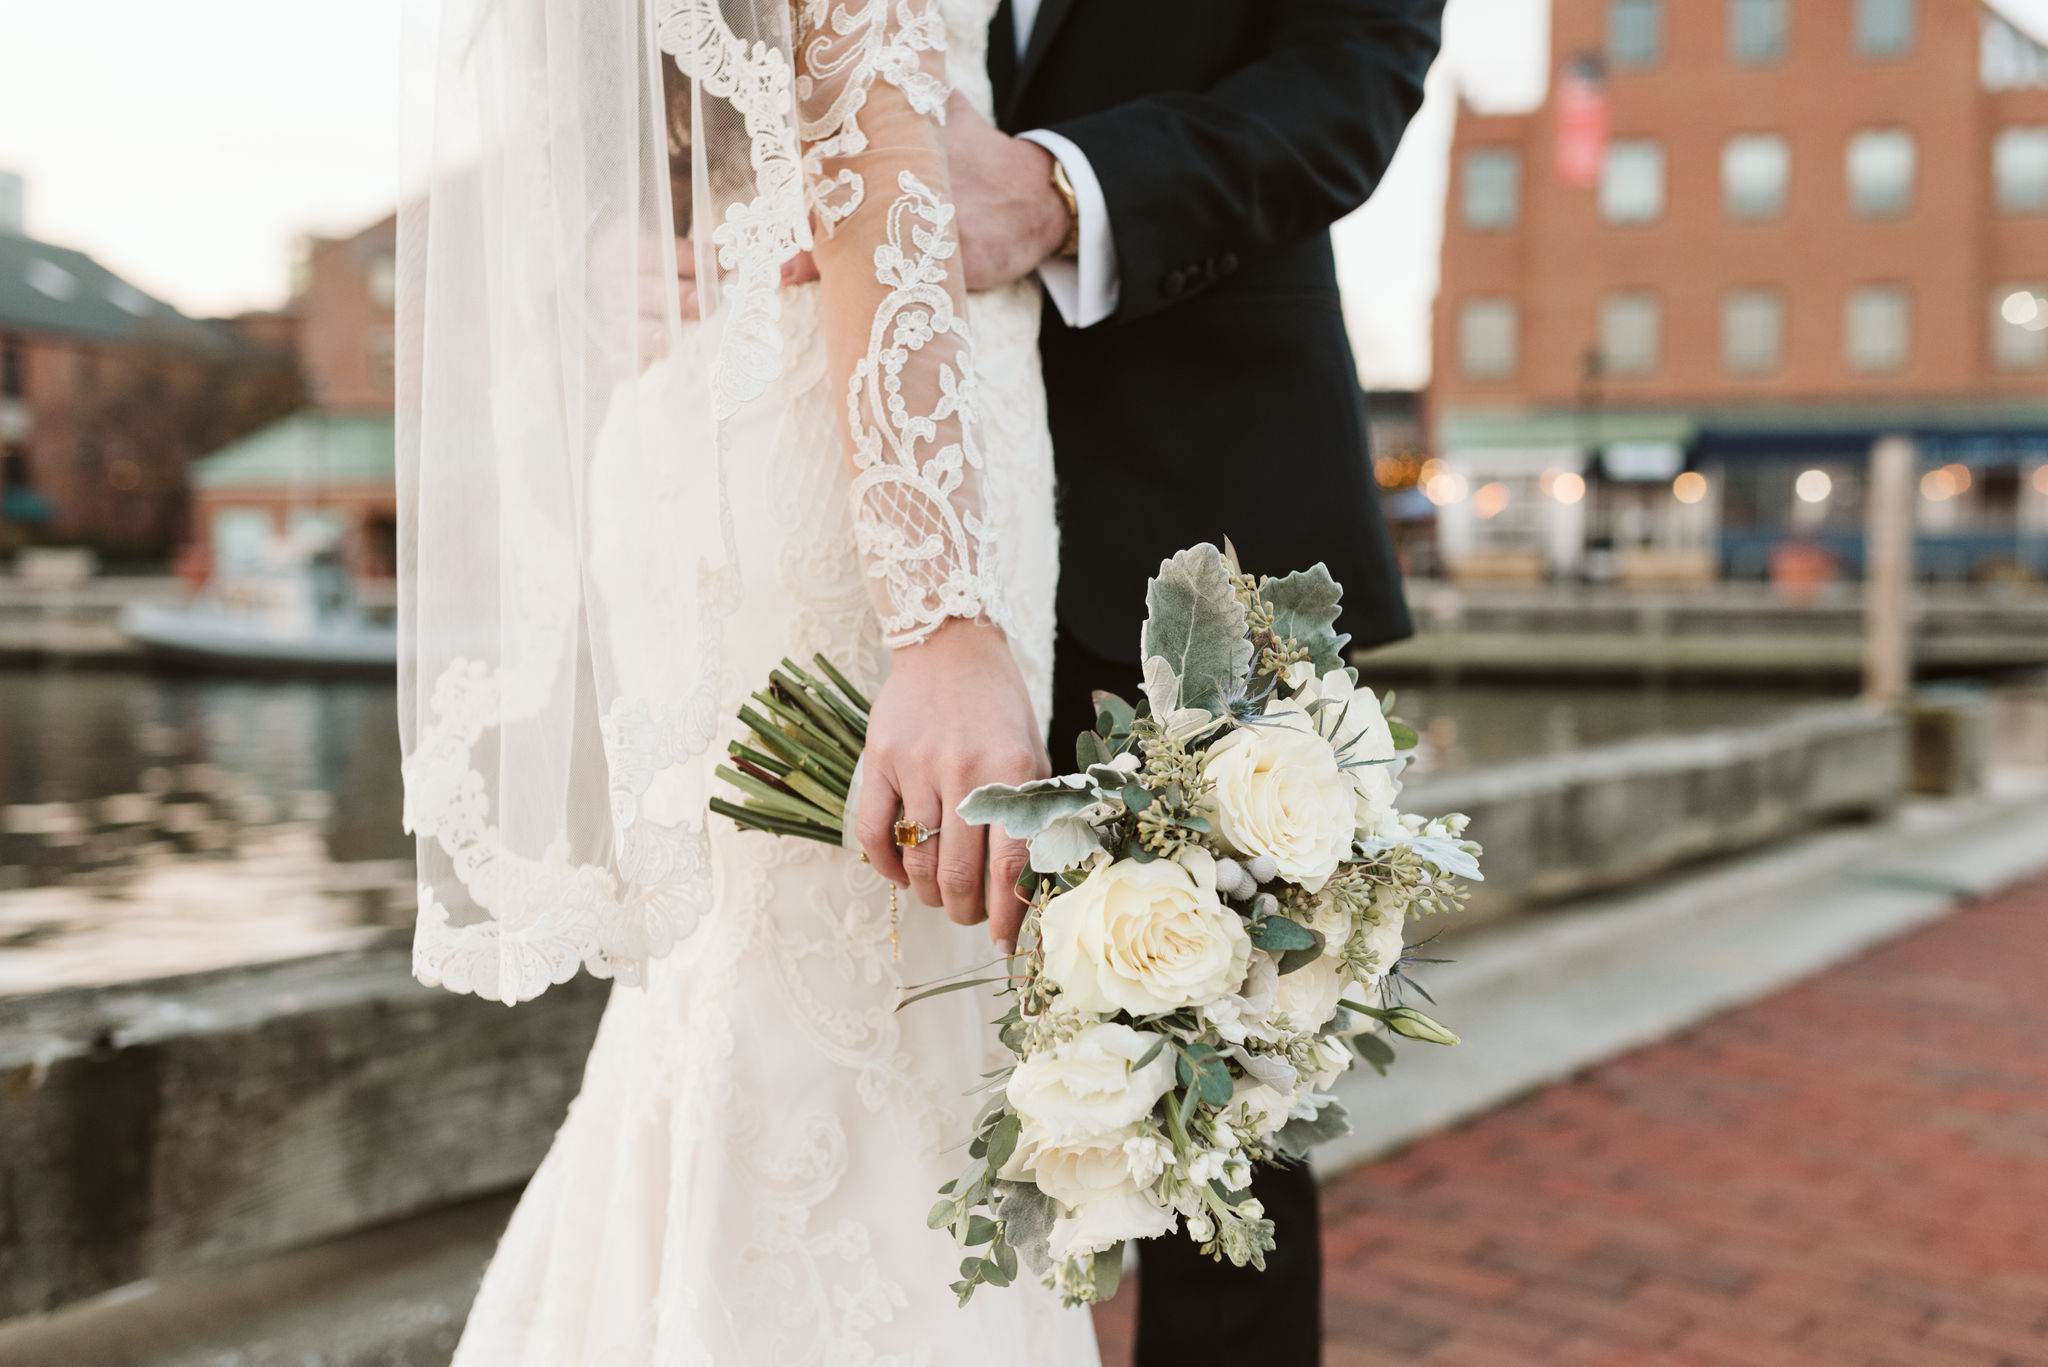  Baltimore, Fells Point, Maryland Wedding Photographer, Winter Wedding, Historic, Classic, Vintage, Bride and Groom Hugging by the Harbor, Closeup of Bridal Bouquet, Lace Wedding Dress 